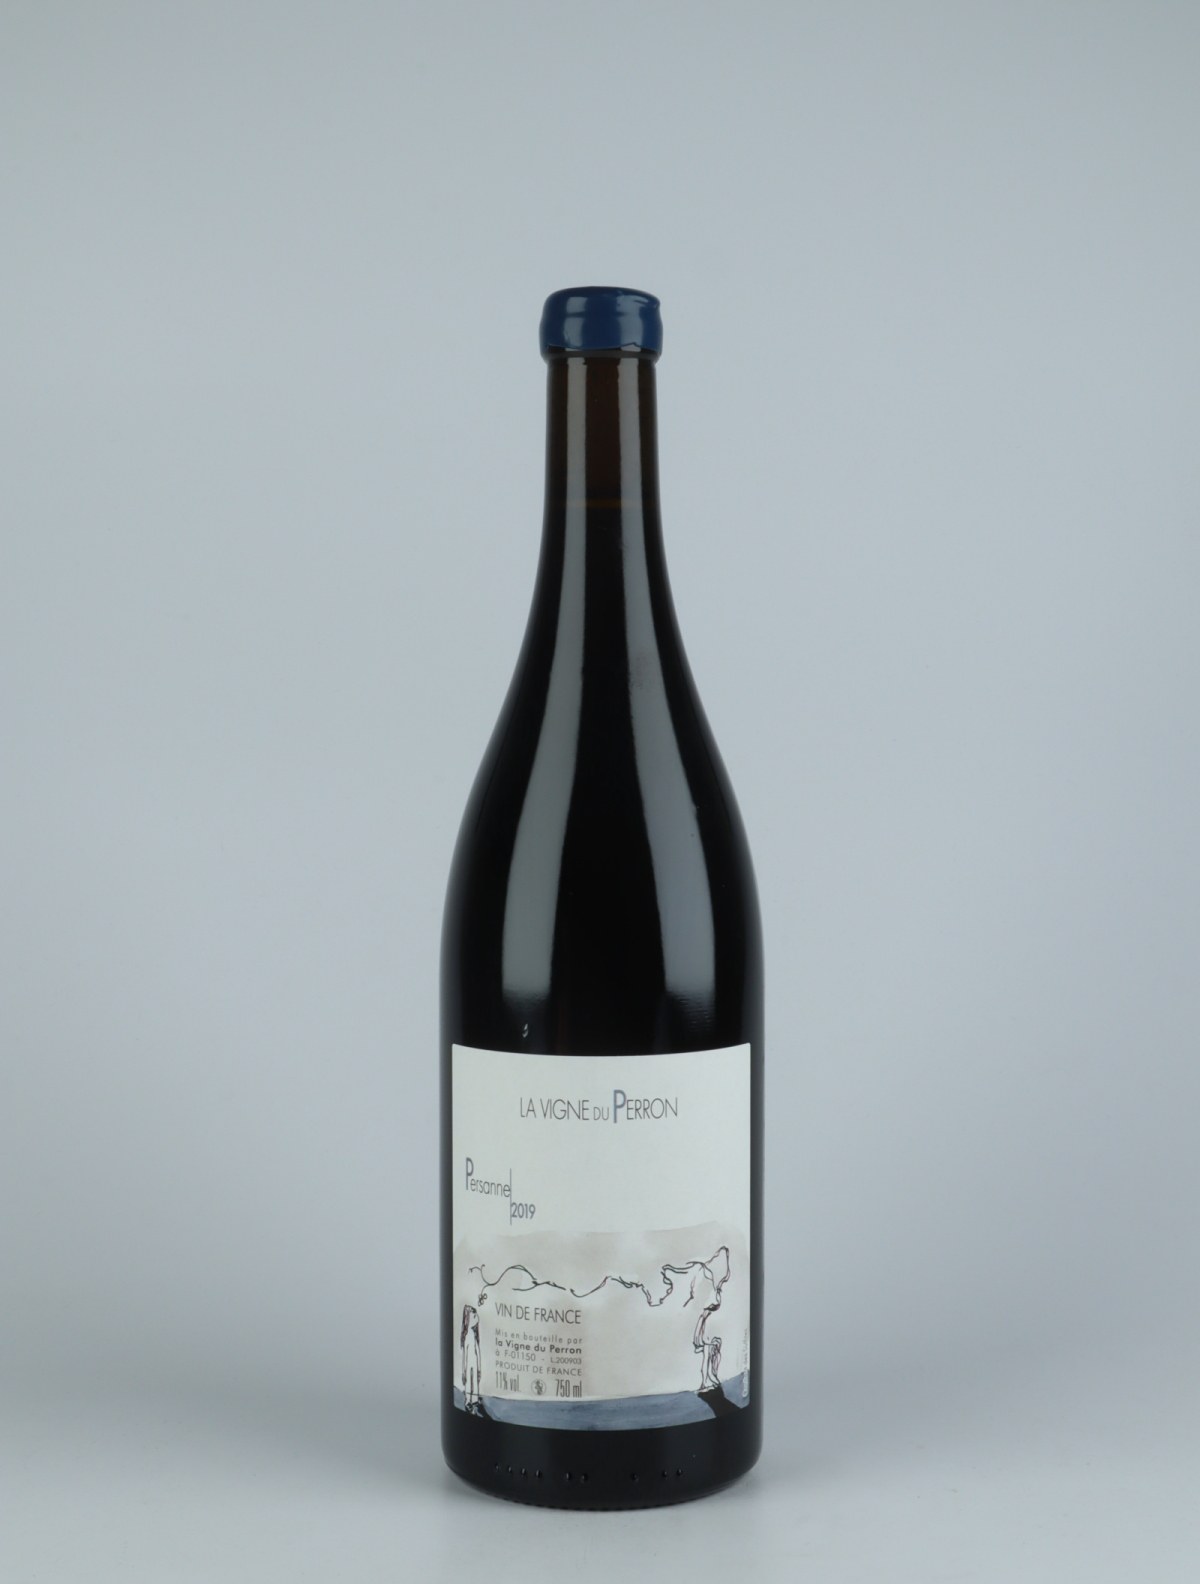 A bottle 2019 Persanne Red wine from Domaine du Perron, Bugey in France